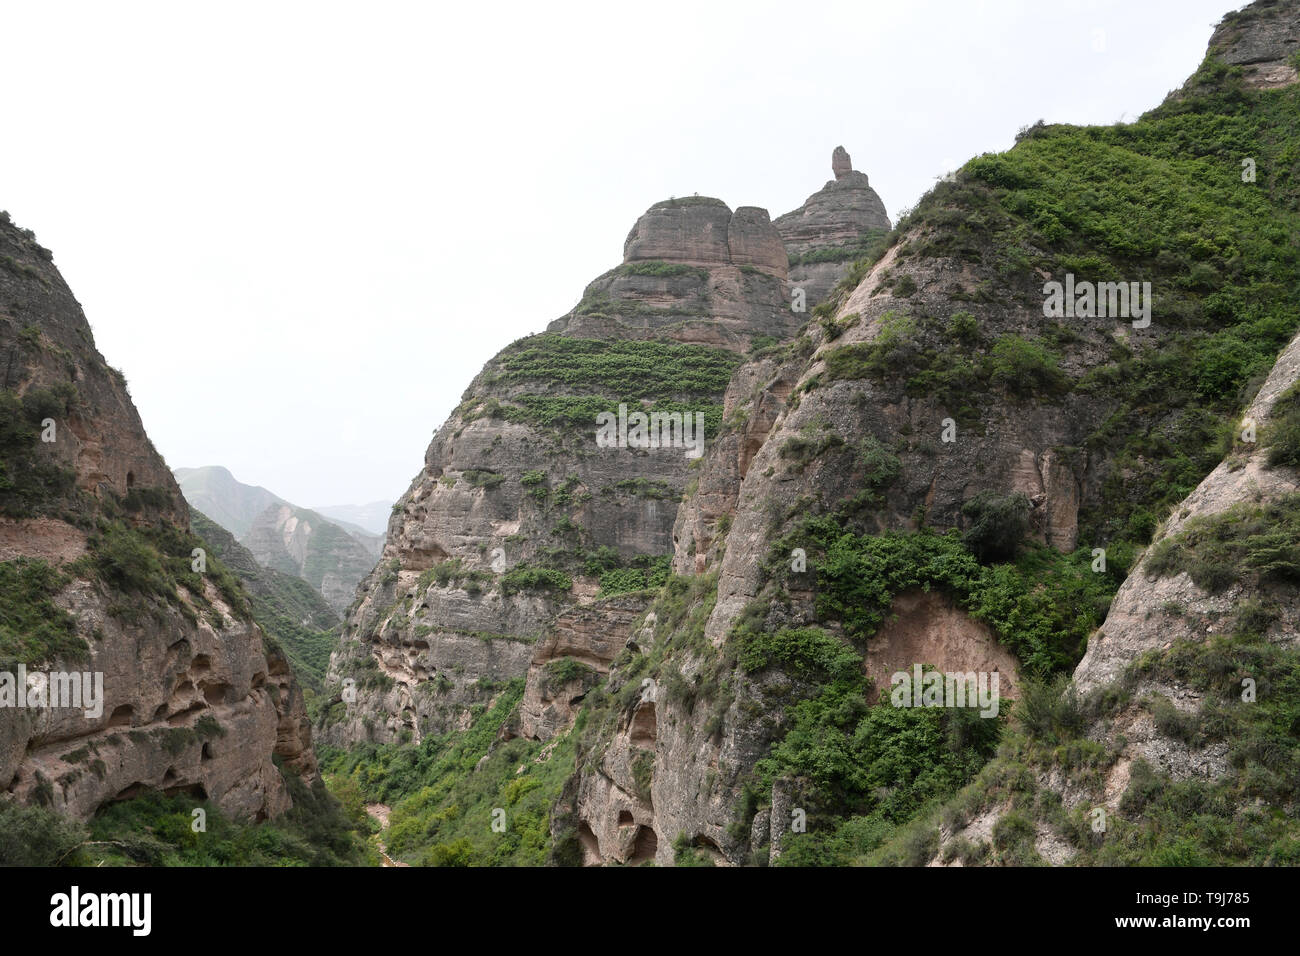 Yongjing. 19th May, 2019. Photo taken on May 19, 2019 shows a stone forest at Bingling Danxia National Geological Park in Yongjing County, northwest China's Gansu Province. Danxia landform is a unique type of landscapes formed from red sandstone and characterized by steep cliffs. Credit: Fan Peishen/Xinhua/Alamy Live News Stock Photo